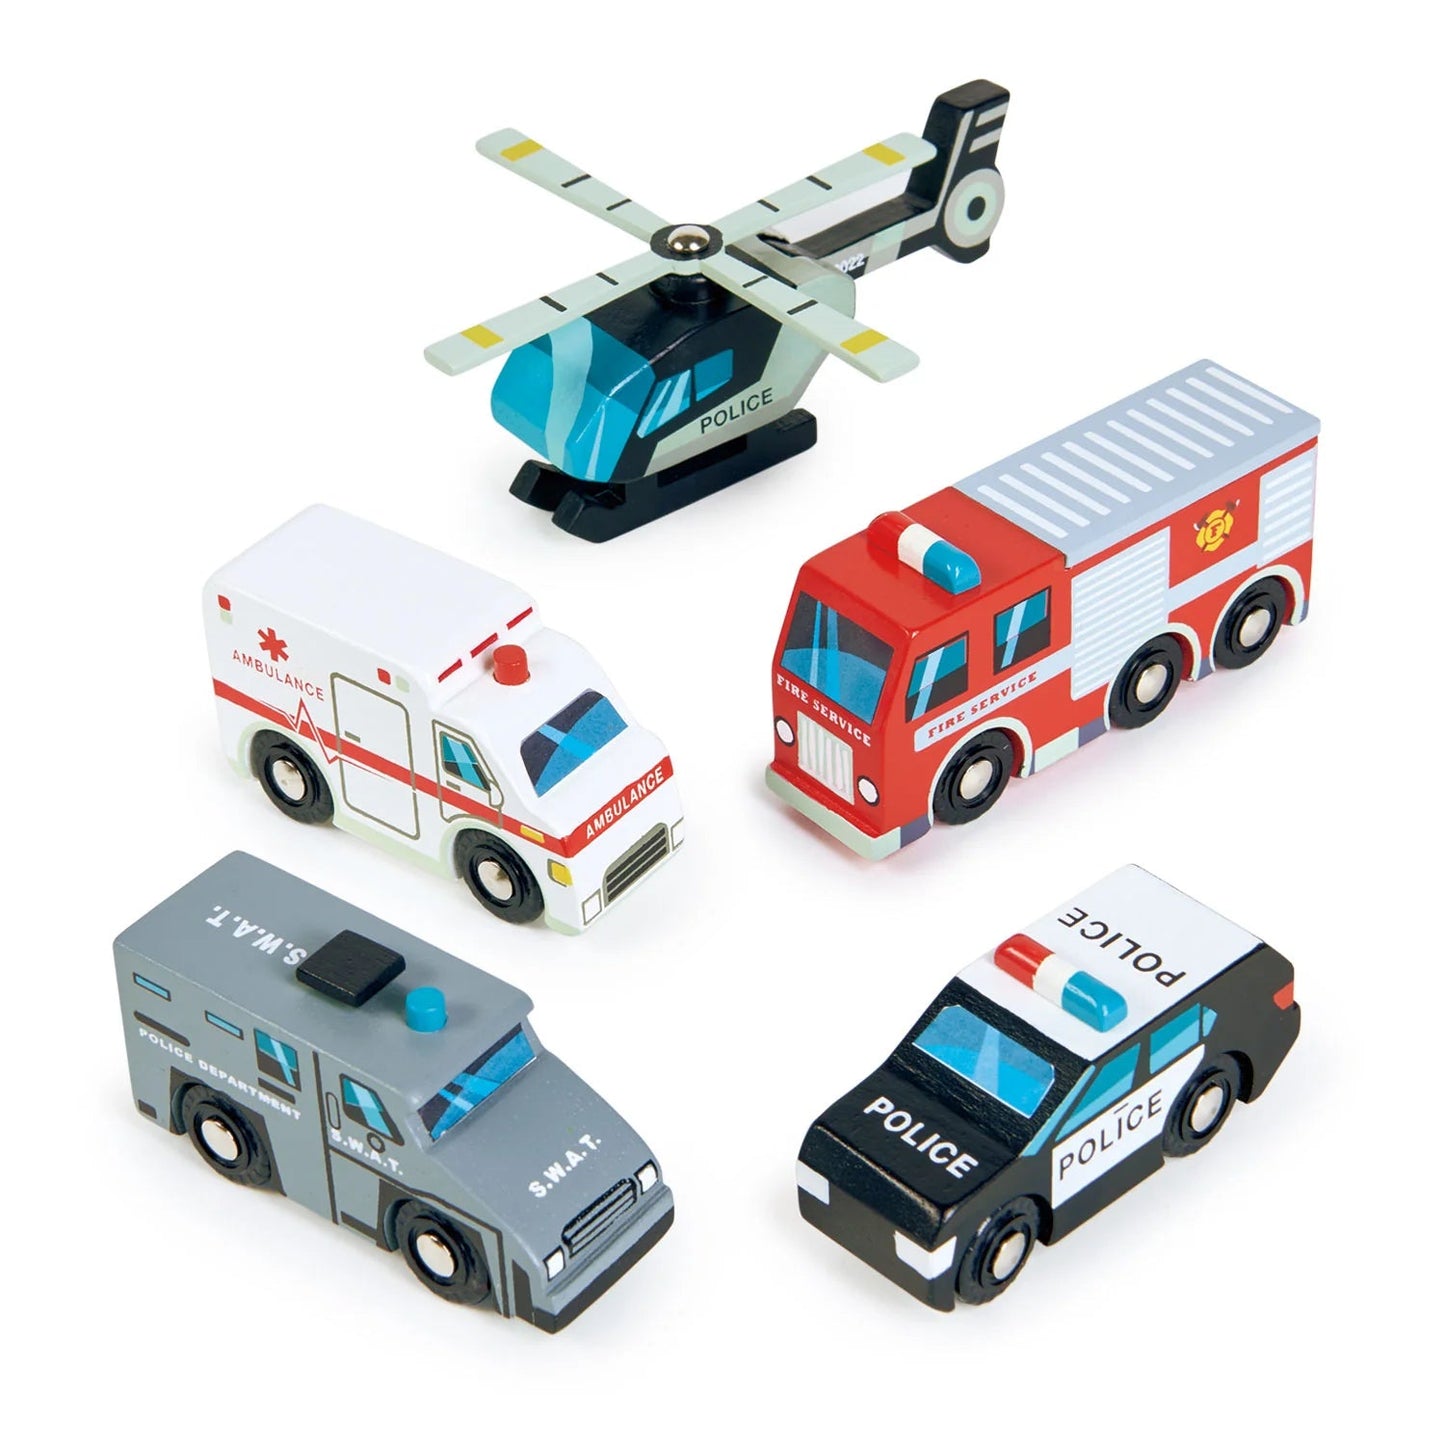 A fantastic set of 5 emergency vehicles with standard wheel width that fits on all train tracks. Set includes; helicopter with rotating blades, ambulance, fire engine, police car and S.W.A.T car. 